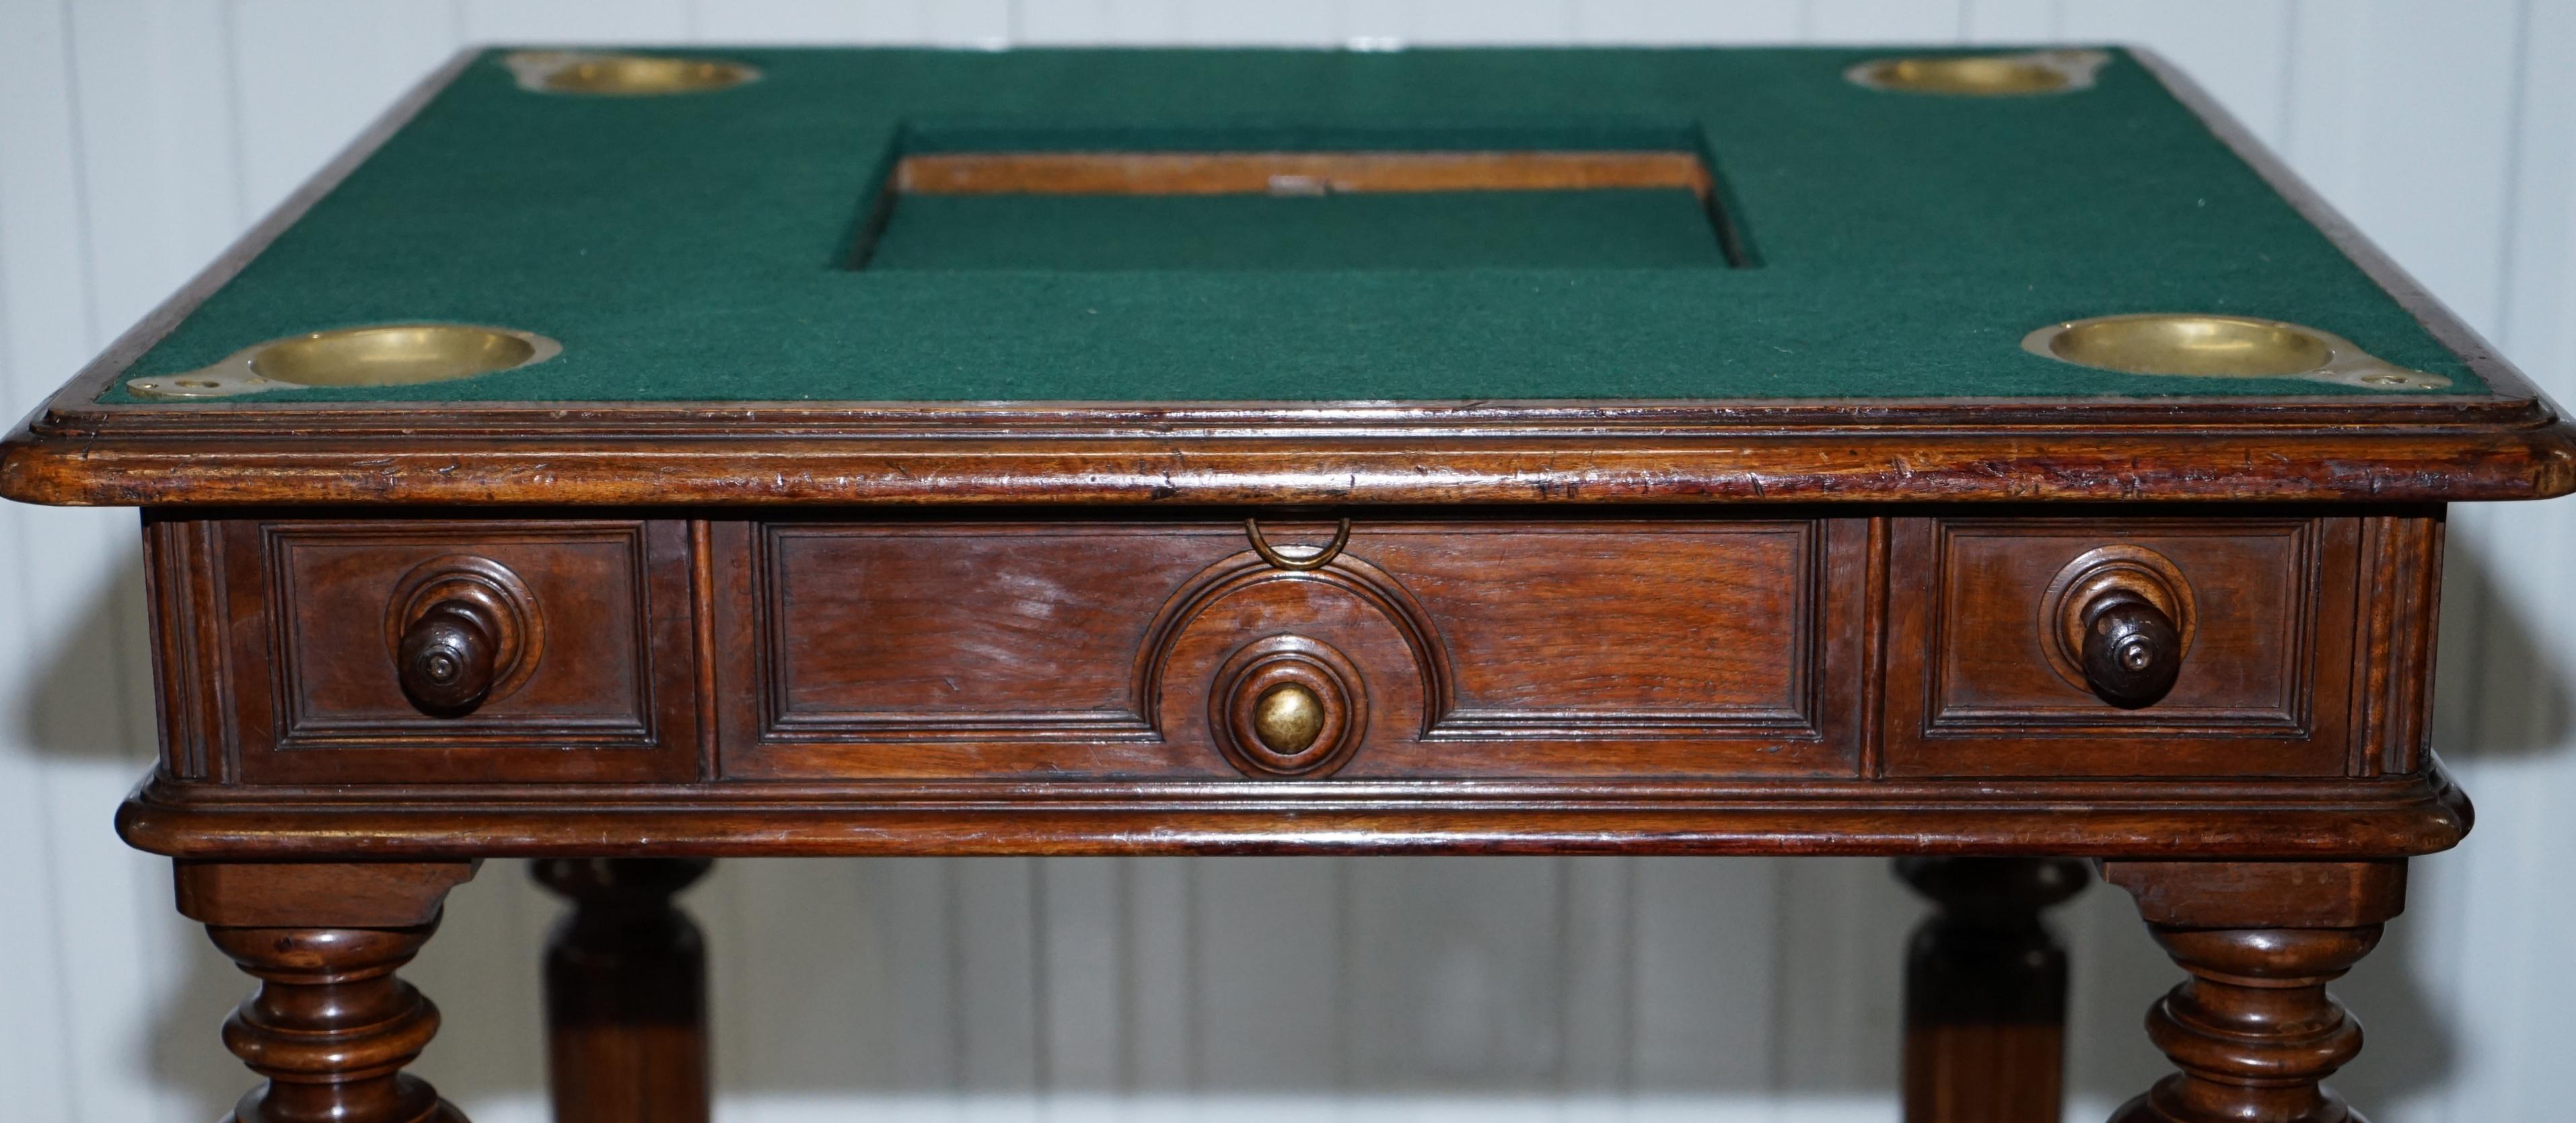 Oak Rare Victorian Games Table circa 1840 Drop Middle Secret Drawers and Buttons For Sale